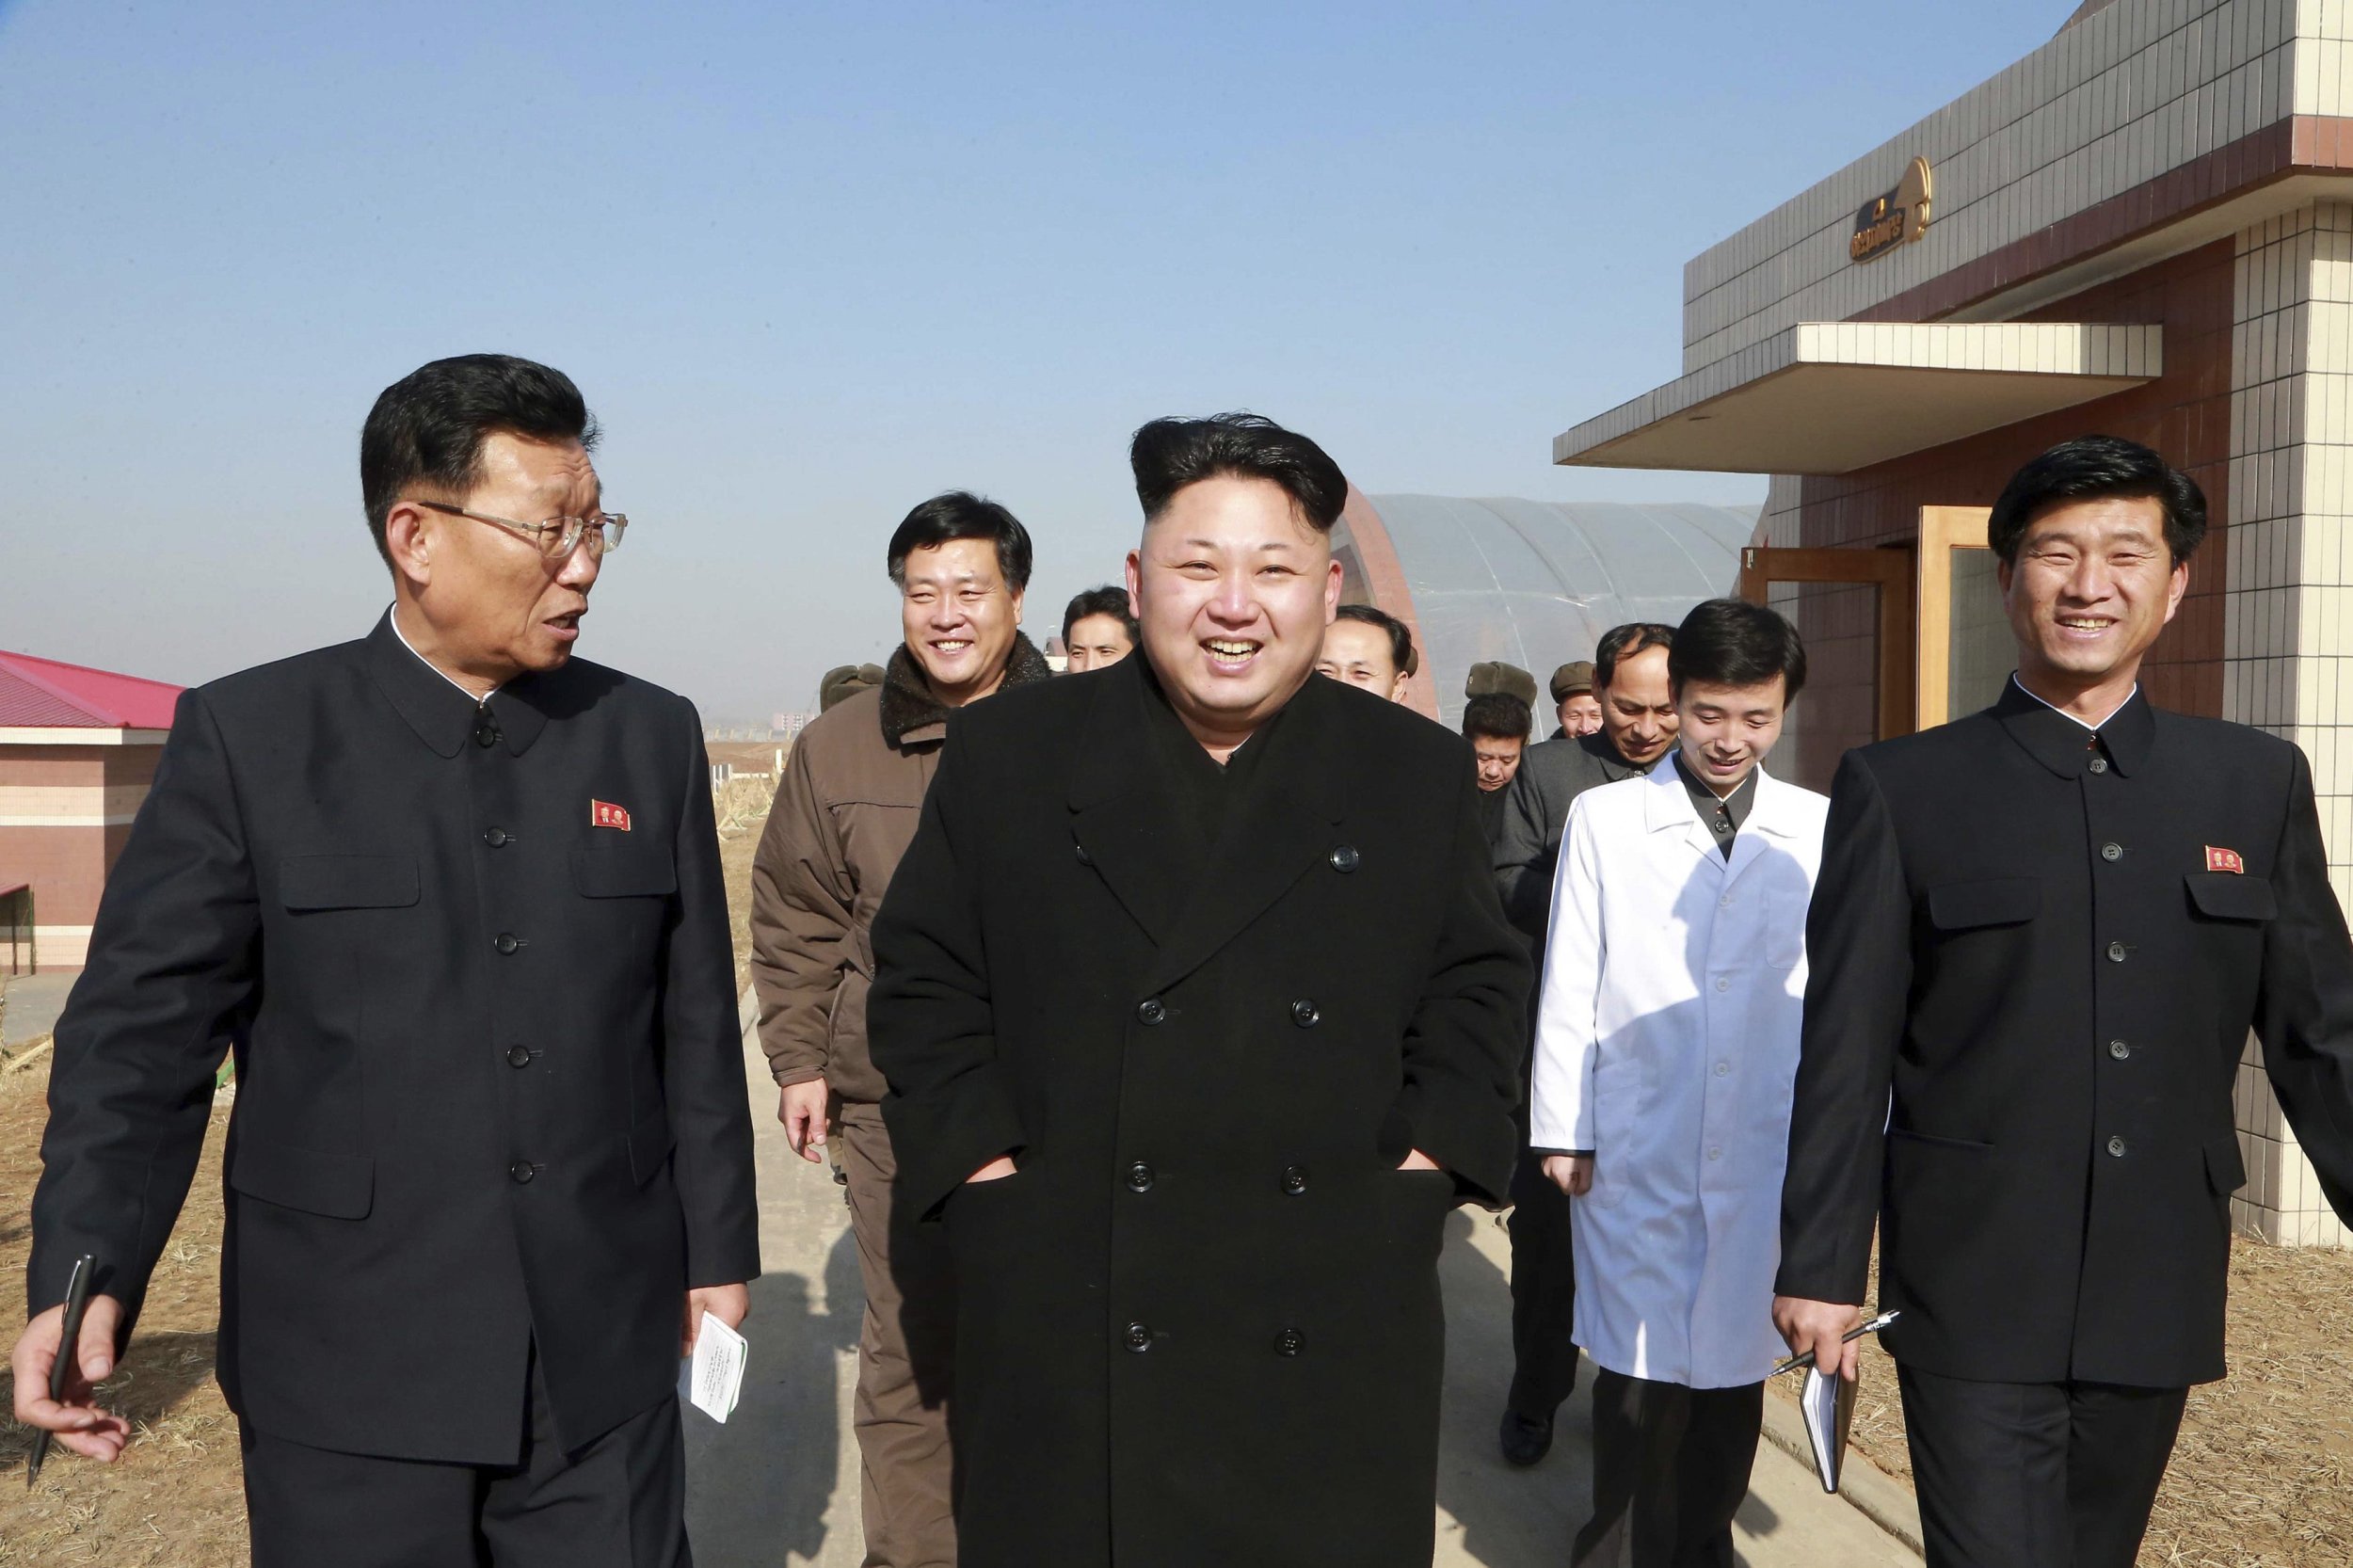 Sony Hack Sanctions Against North Korea Likely To Be Ineffective Experts Say Ibtimes